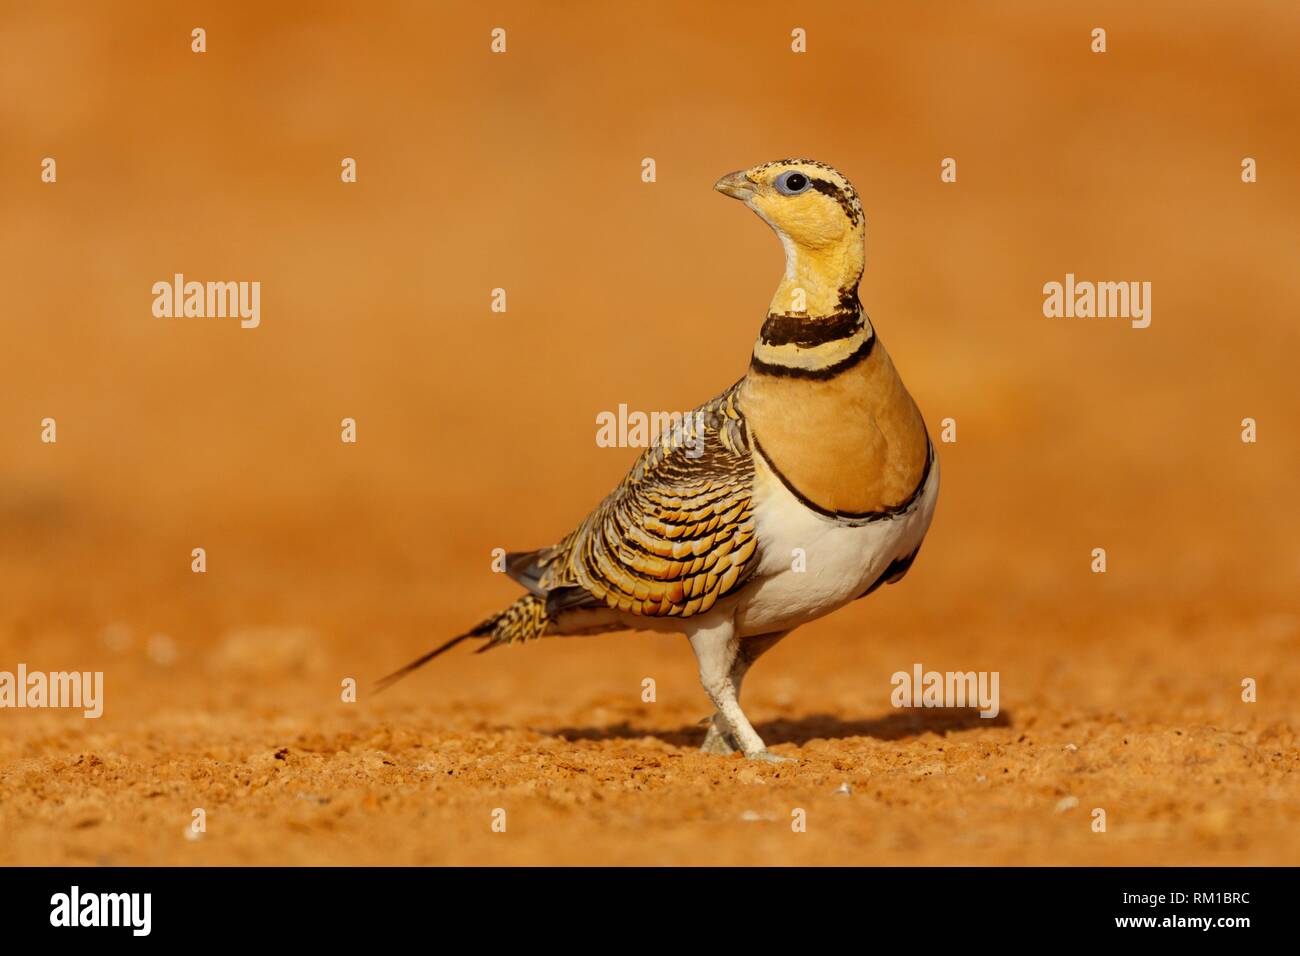 Pin-tailed sandgrouse. Pterocles alchata. Spain Stock Photo - Alamy